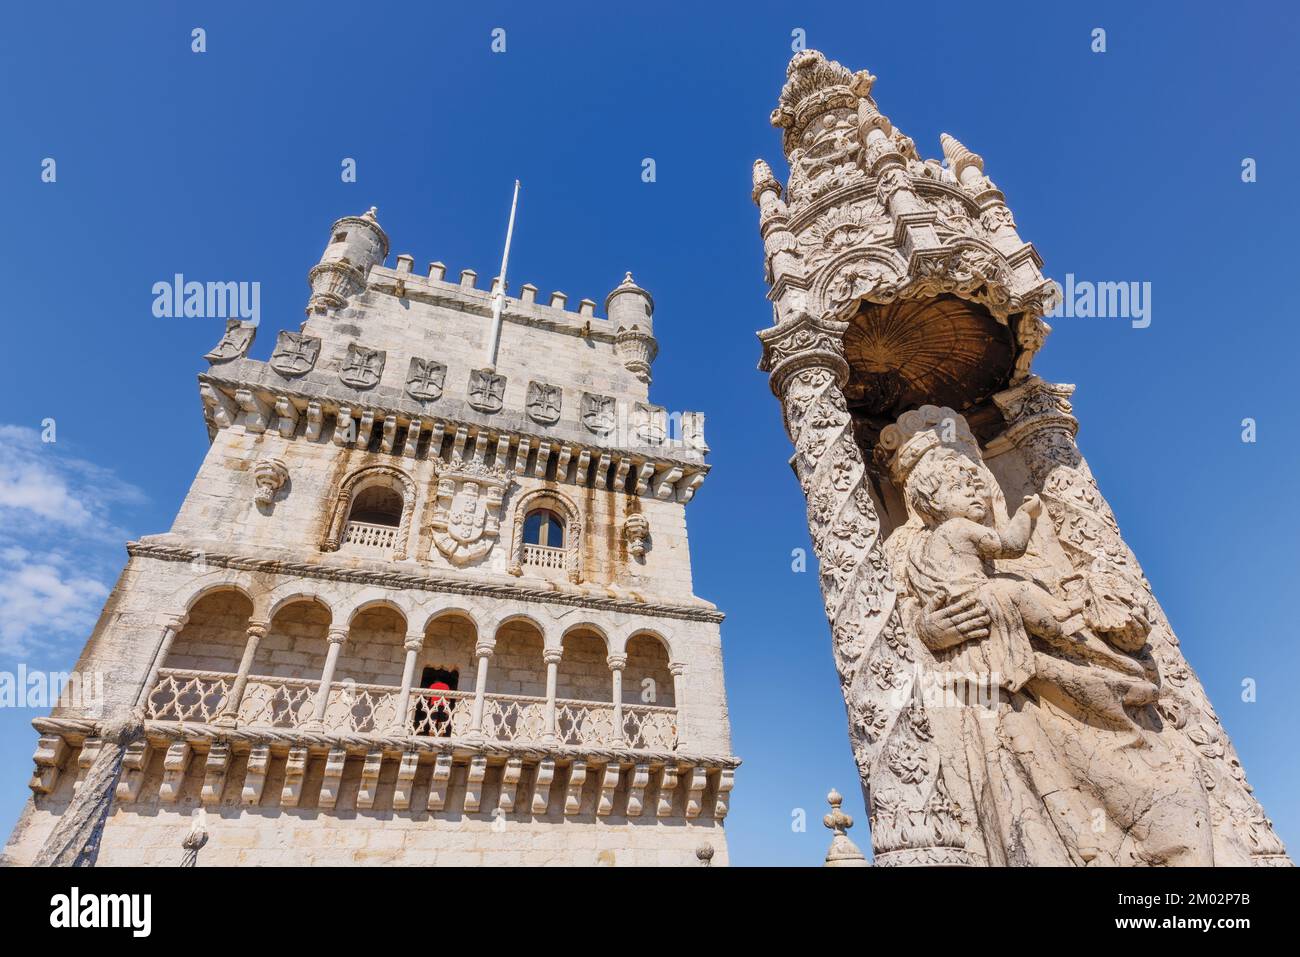 Lisbon, Portugal.  The 16th century Torre de Belem or Tower of Belem. The tower and image of the Virgin and Child on the bulwark terrace.  The buildin Stock Photo